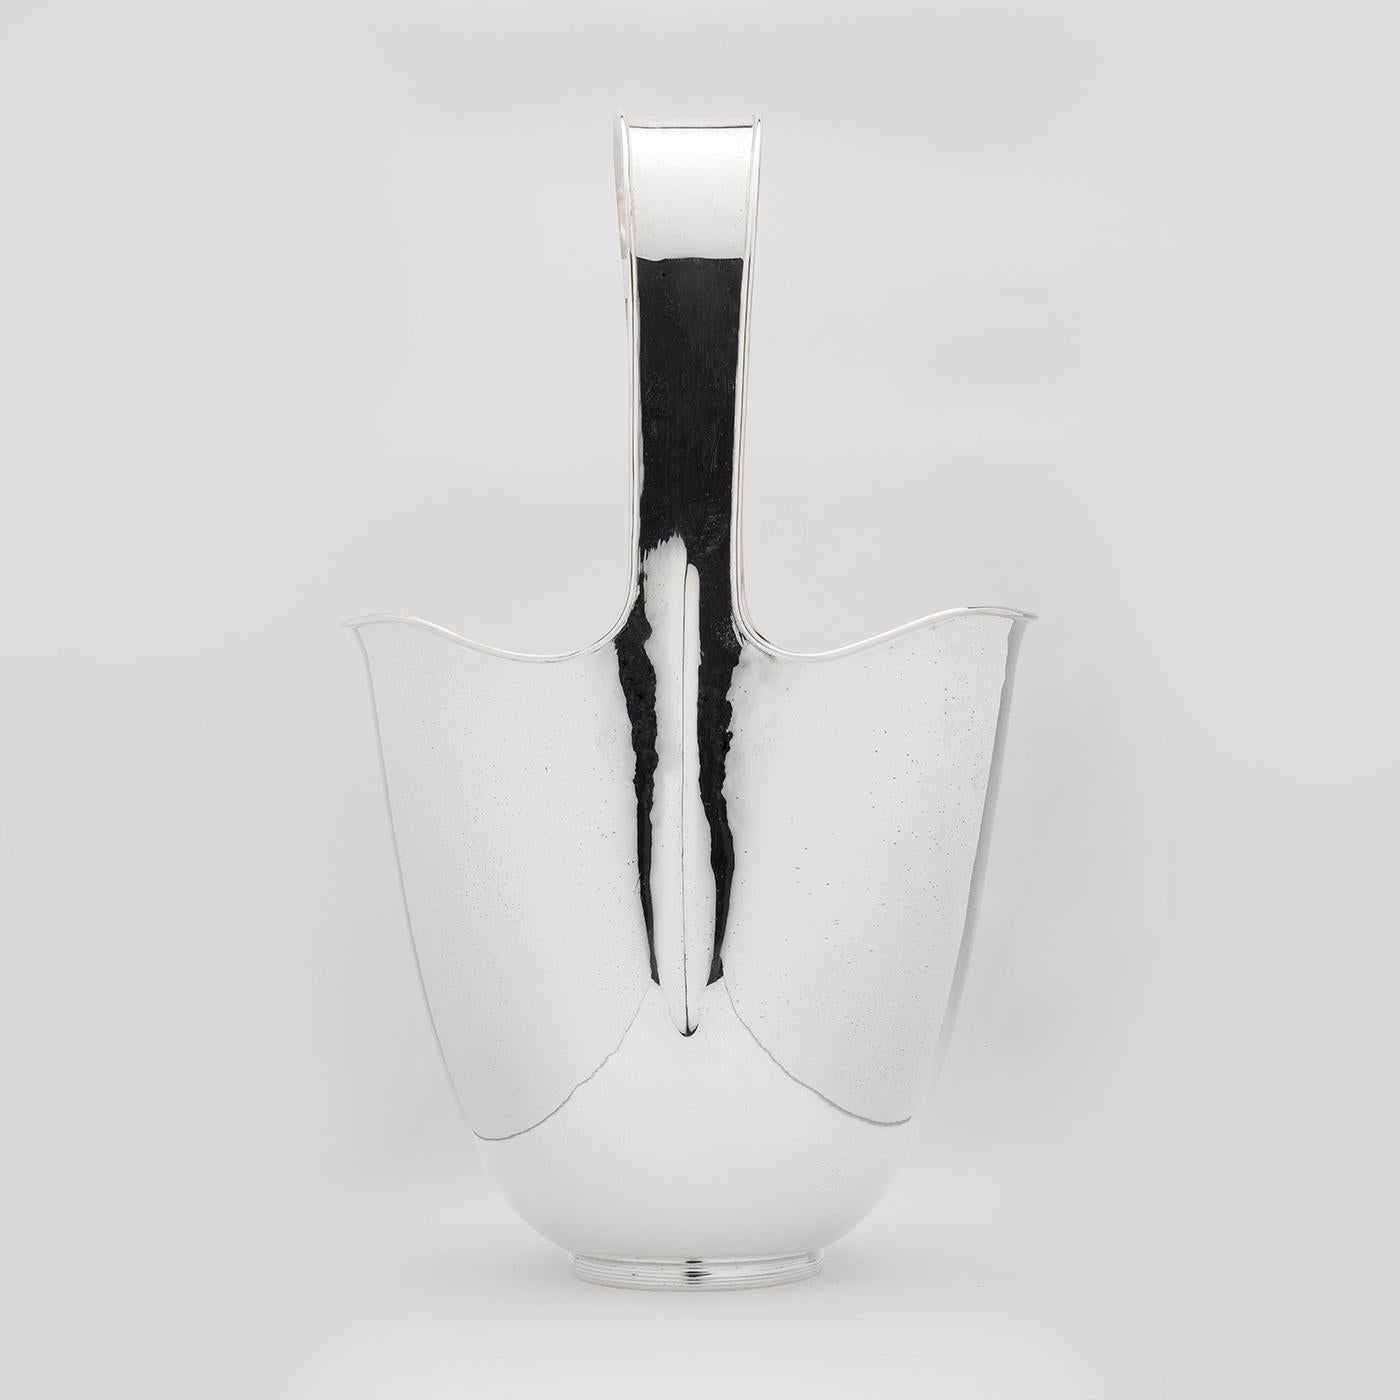 The skilled artisans at Fala demonstrate their mastery and passion in this stunning piece of functional decor. Elegant in its simplicity, this silver plated metal ice bucket is marked by a seamless silhouette, starting from the round base and